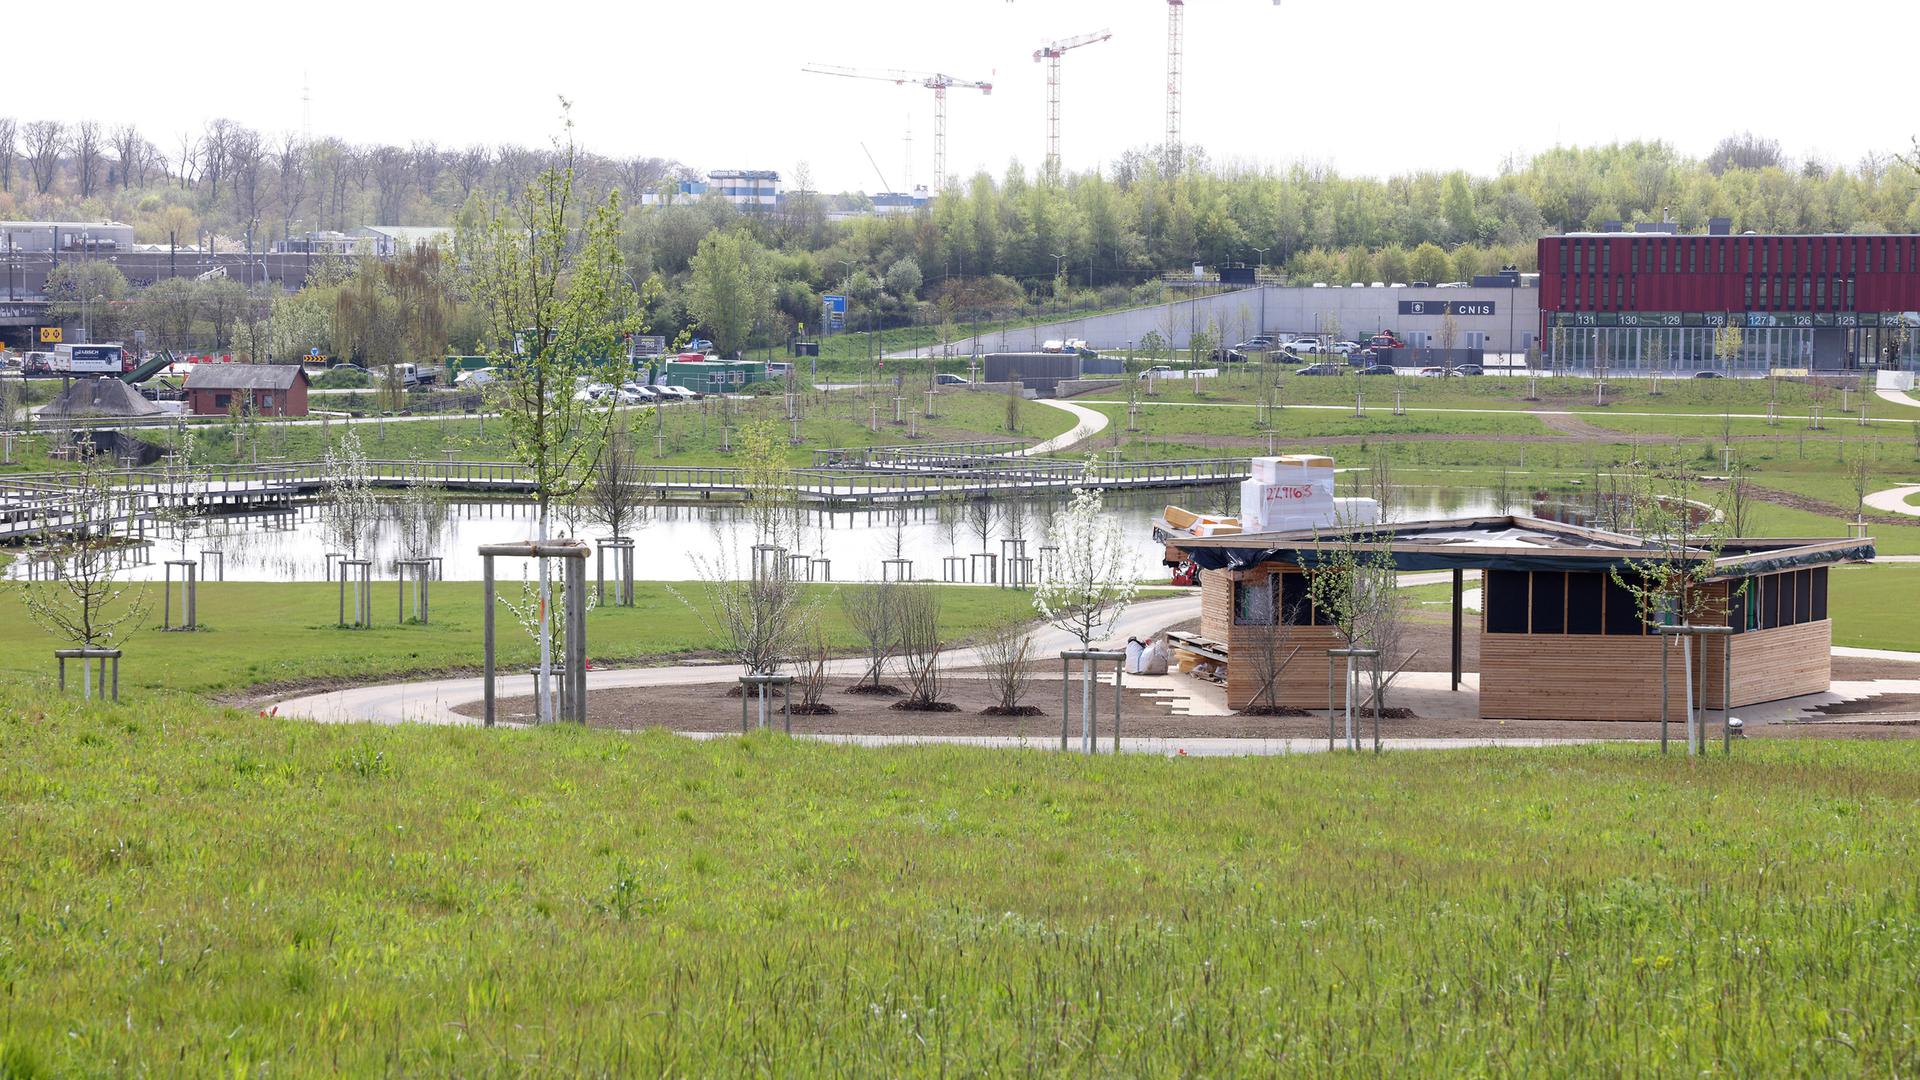 New 16.6 hectare park in Gasperich is almost ready to open to the public 